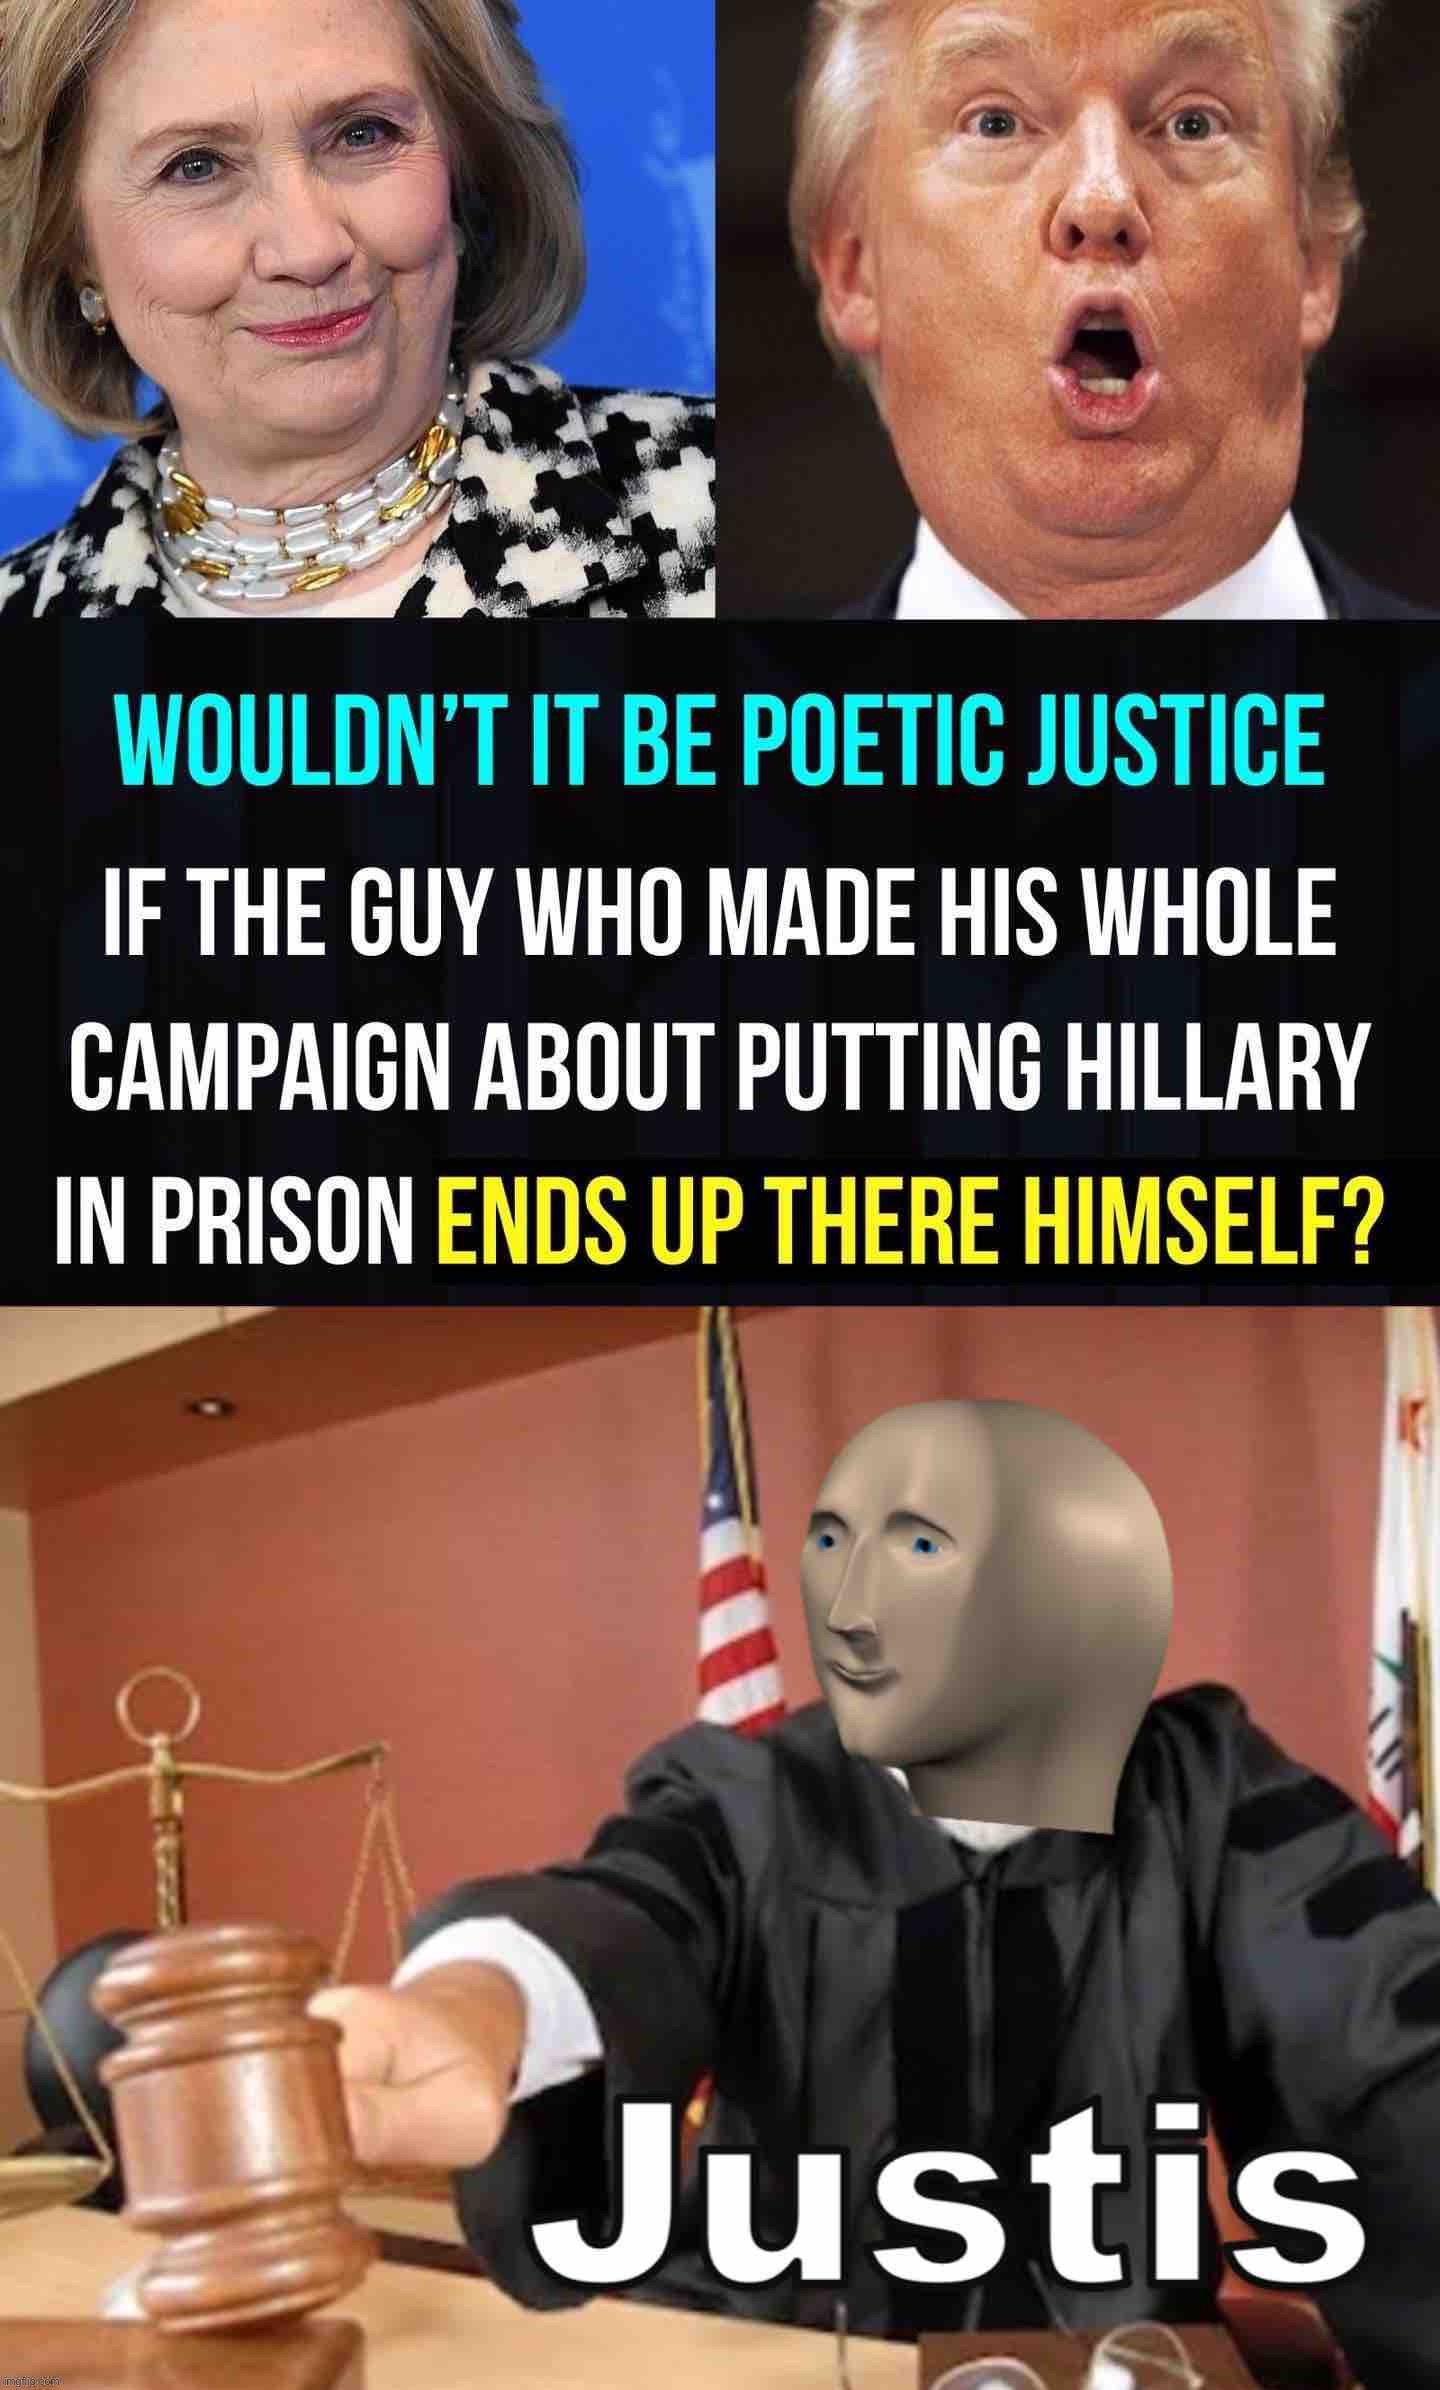 Eyyy it would! | image tagged in meme man justis,justice,poetic justice,karma,lock him up,karma's a bitch | made w/ Imgflip meme maker